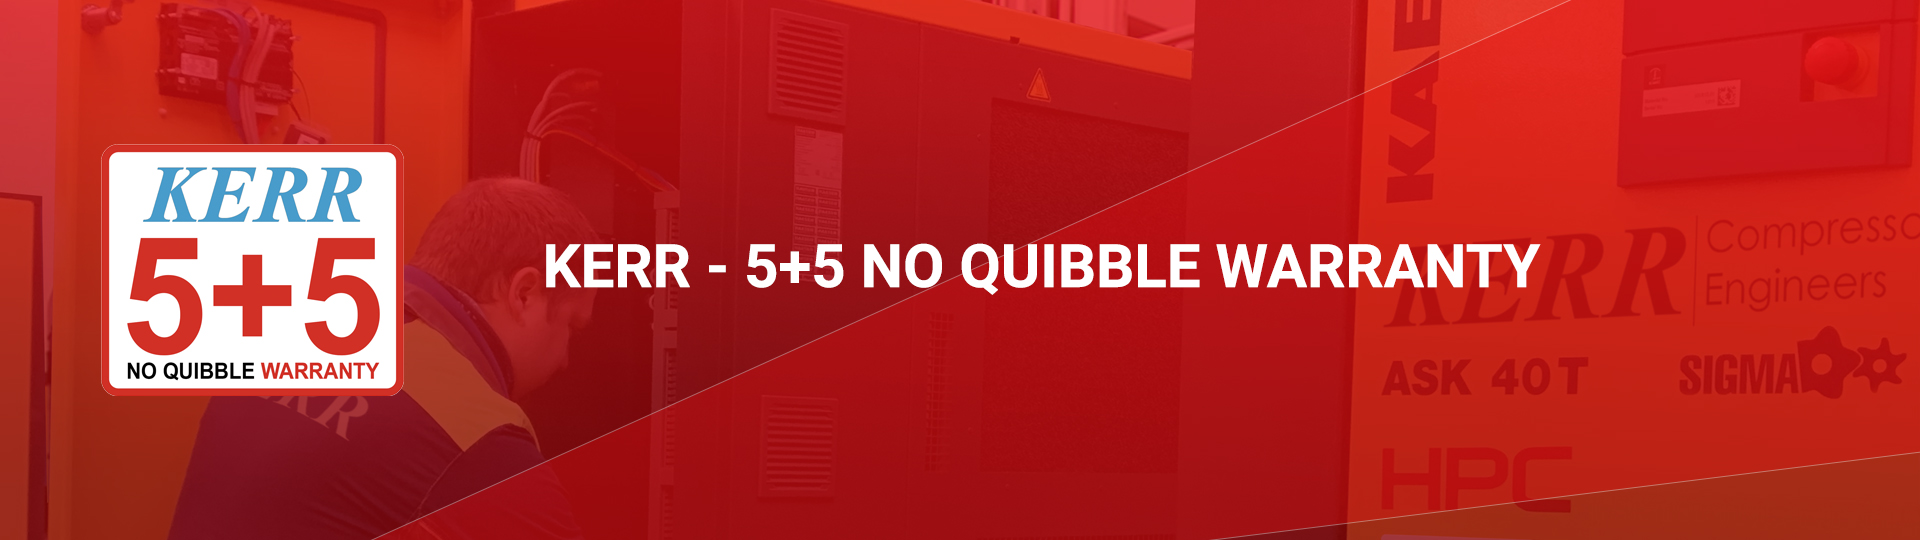 5+5 NO QUIBBLE EXTENDED WARRANTY